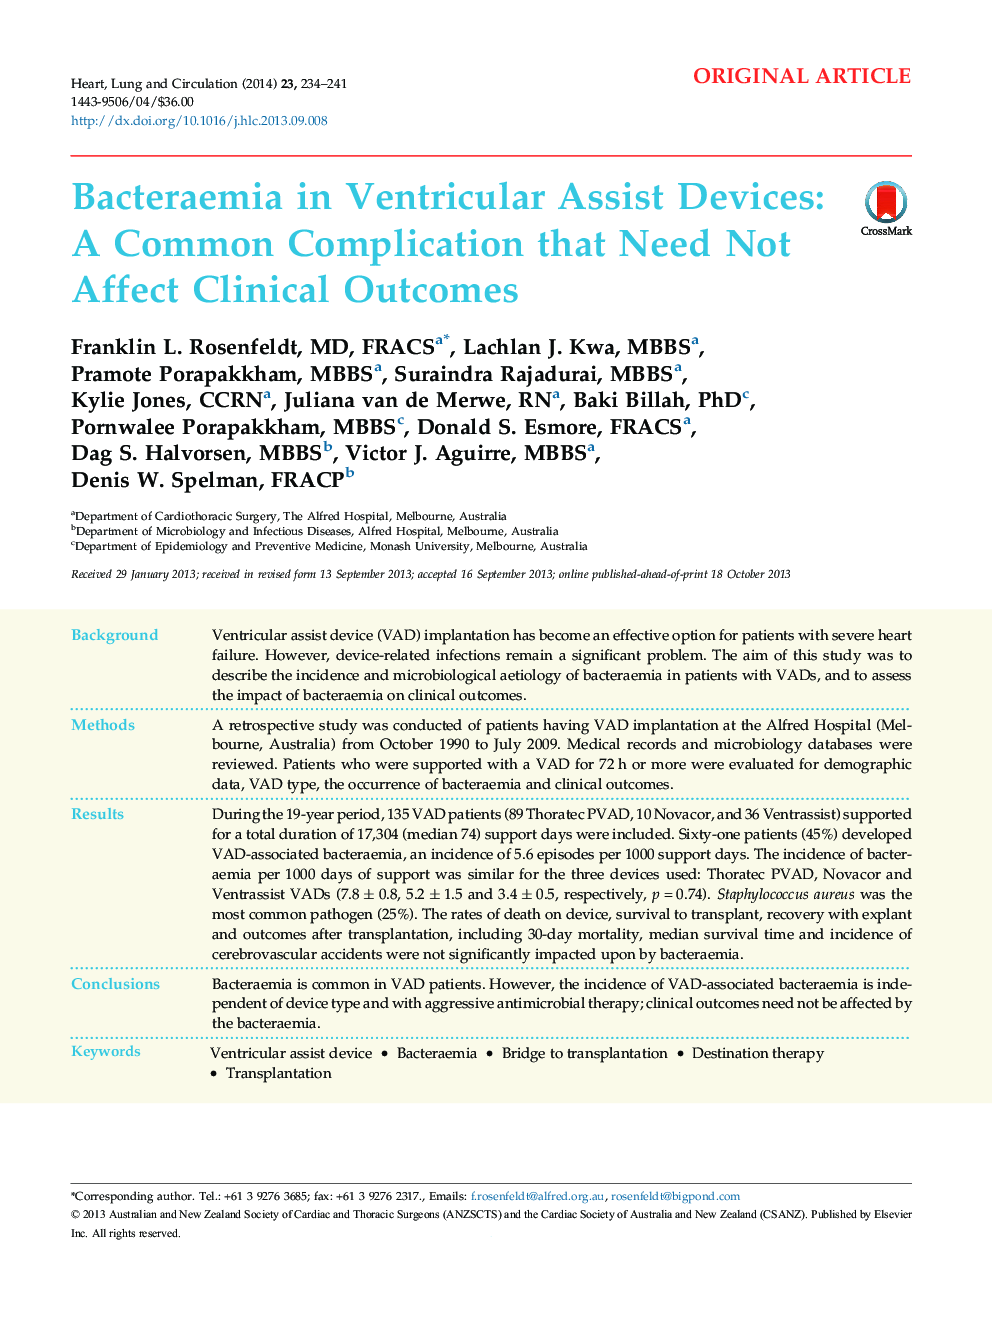 Bacteraemia in Ventricular Assist Devices: A Common Complication that Need Not Affect Clinical Outcomes